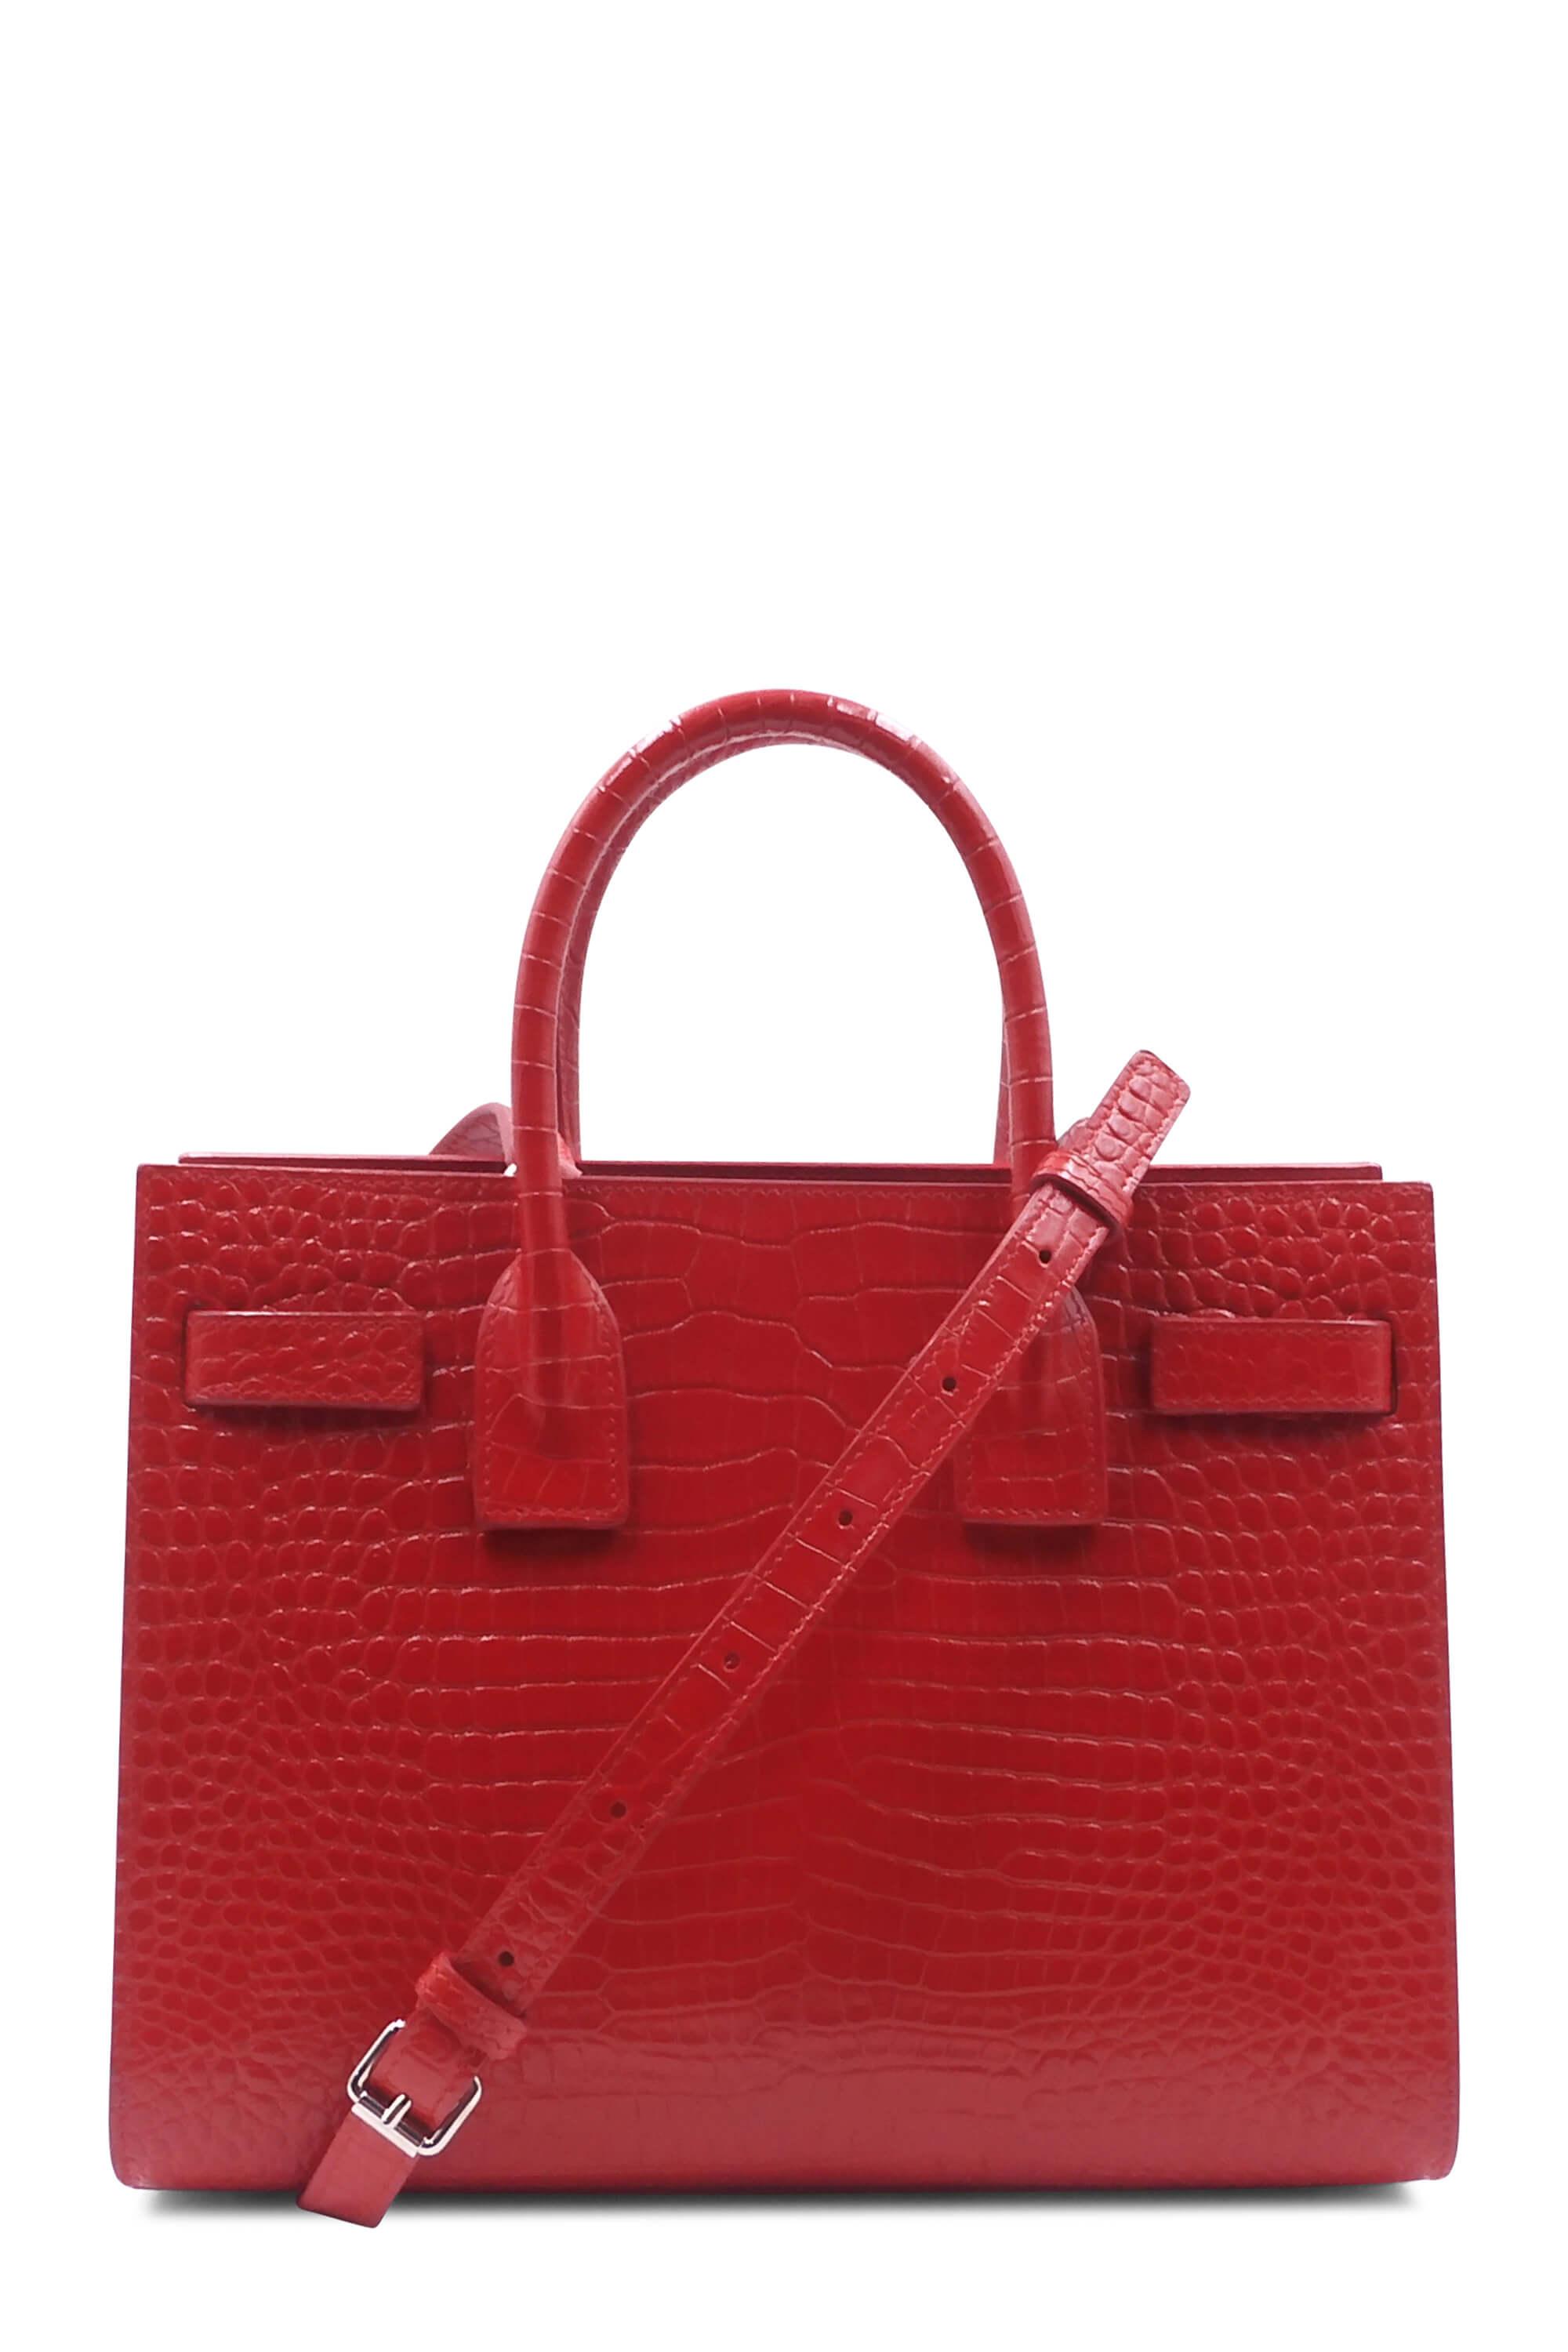 Classic Baby Sac De Jour Crocodile Embossed Red – Style Theory SG